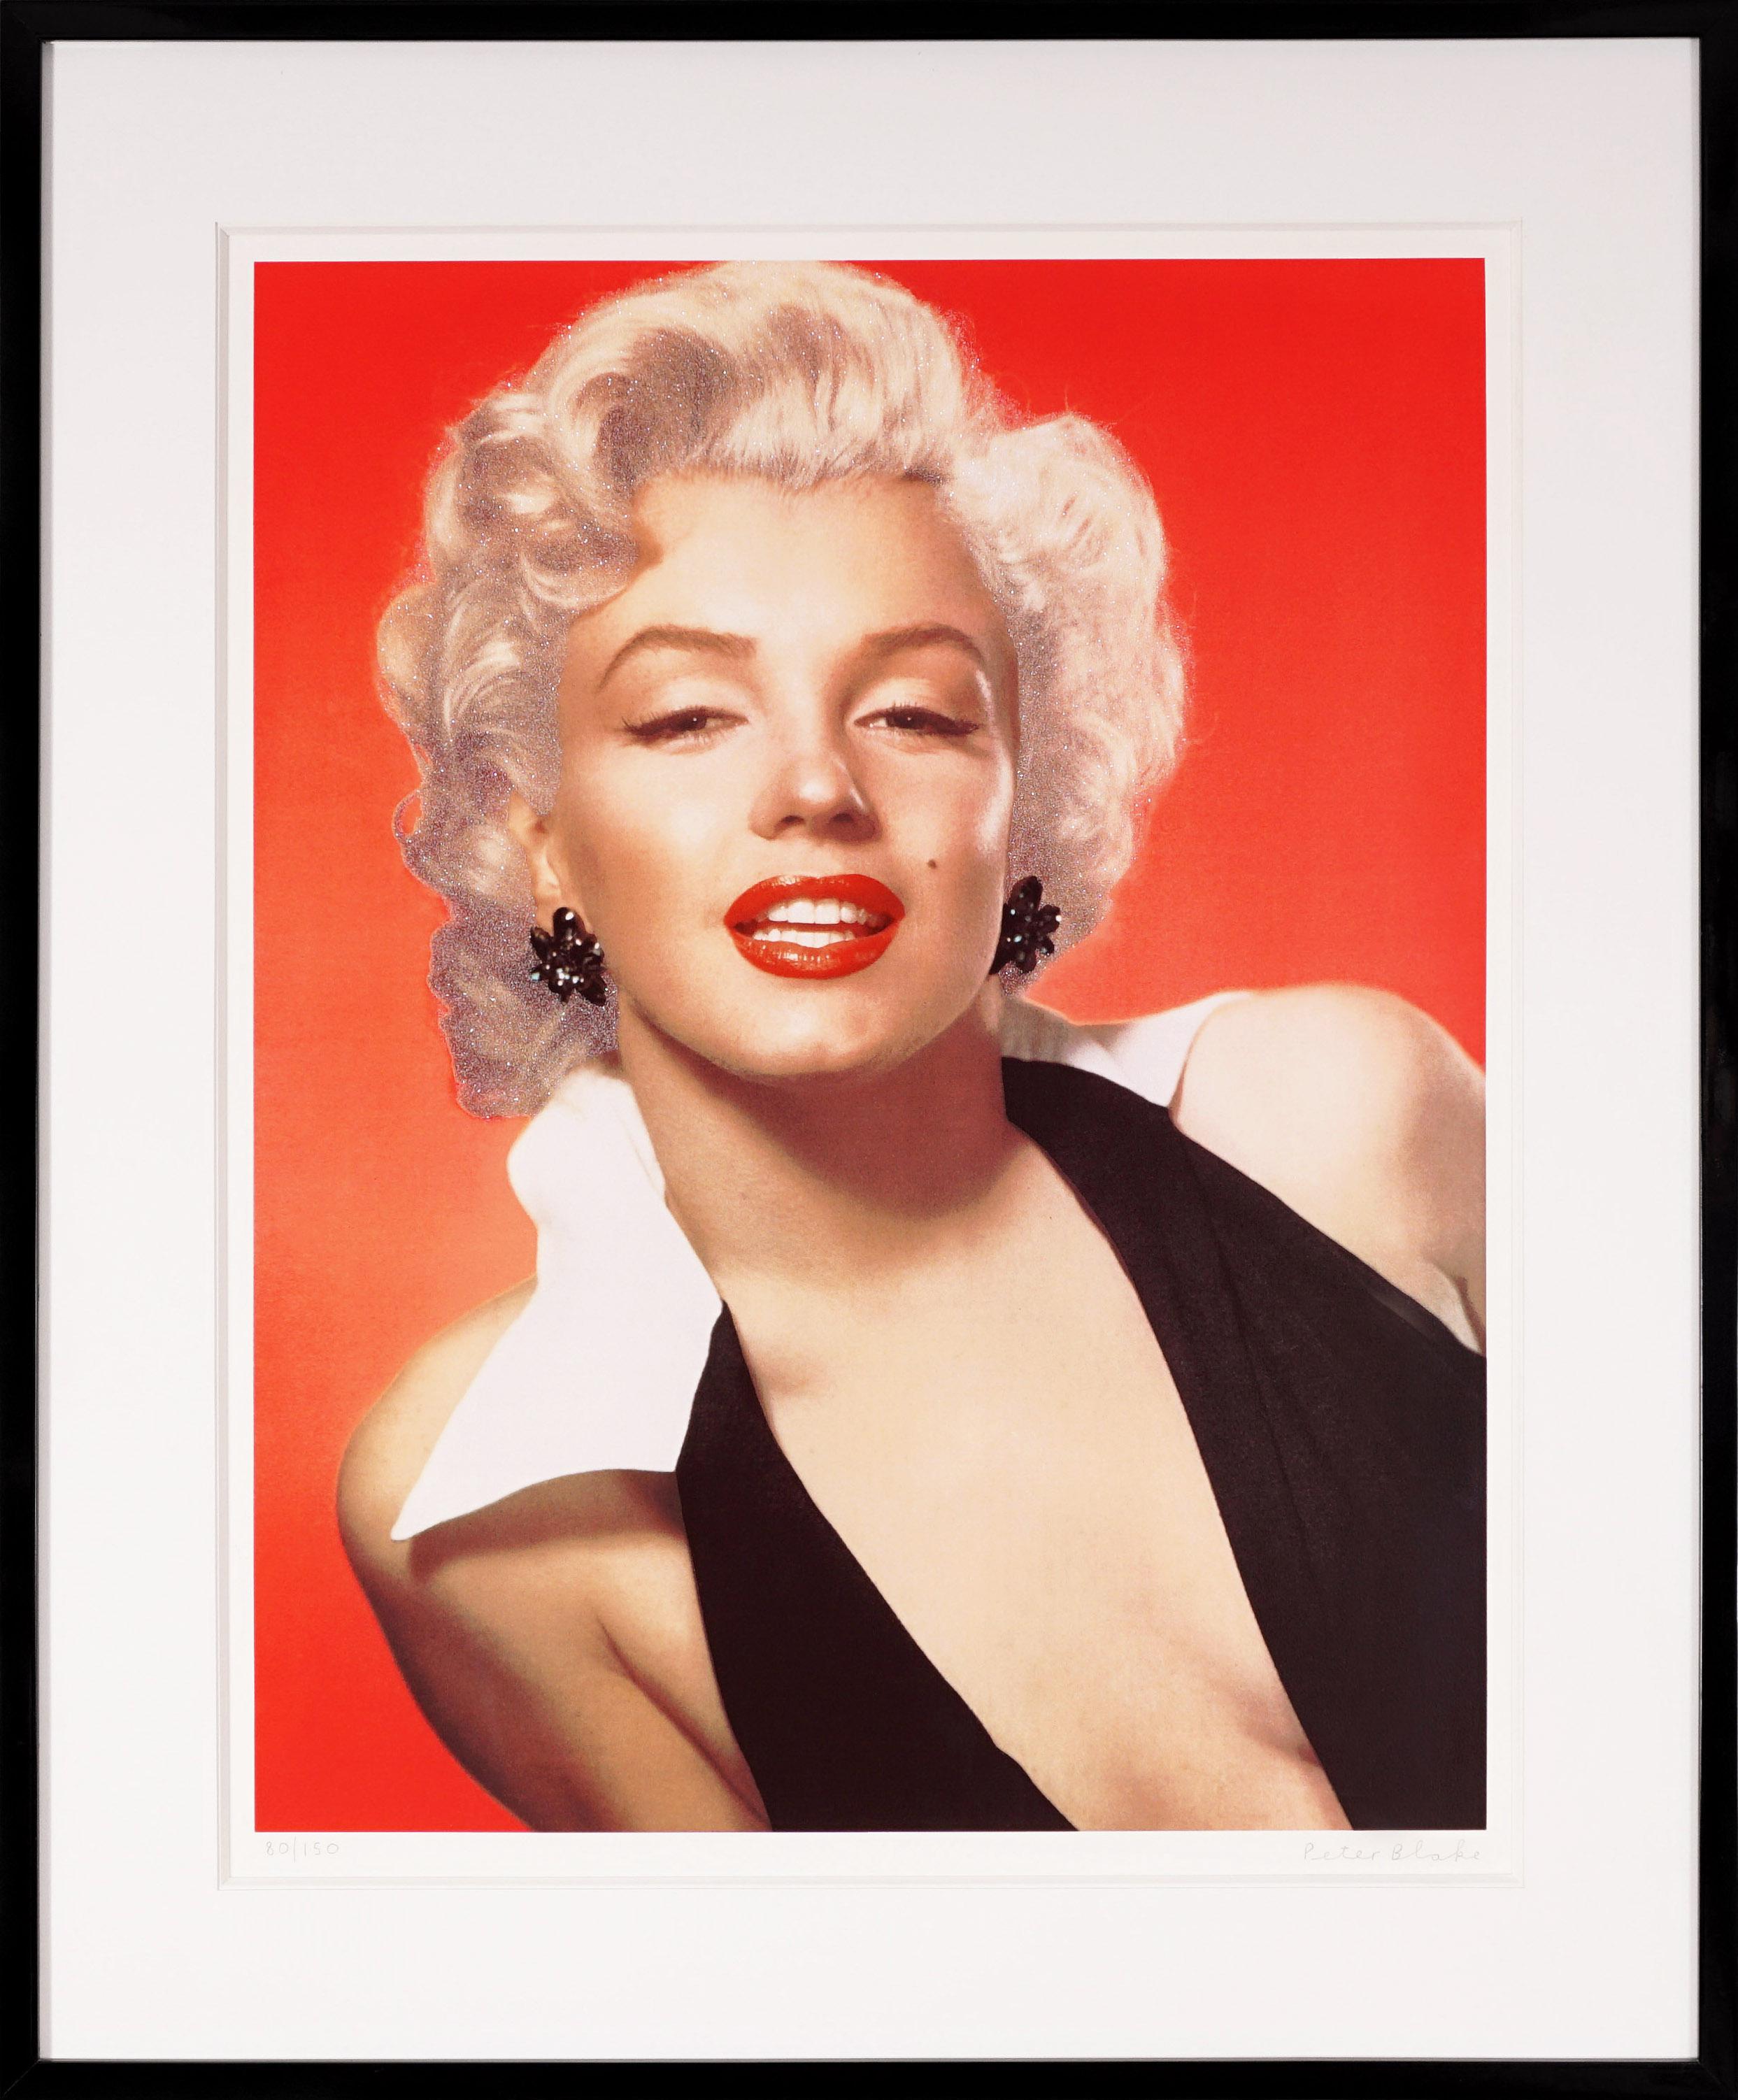 Pop Art 'Marilyn Monroe' Portrait with Diamond Dust, Limited Edition, 2010 - Mixed Media Art by Peter Blake